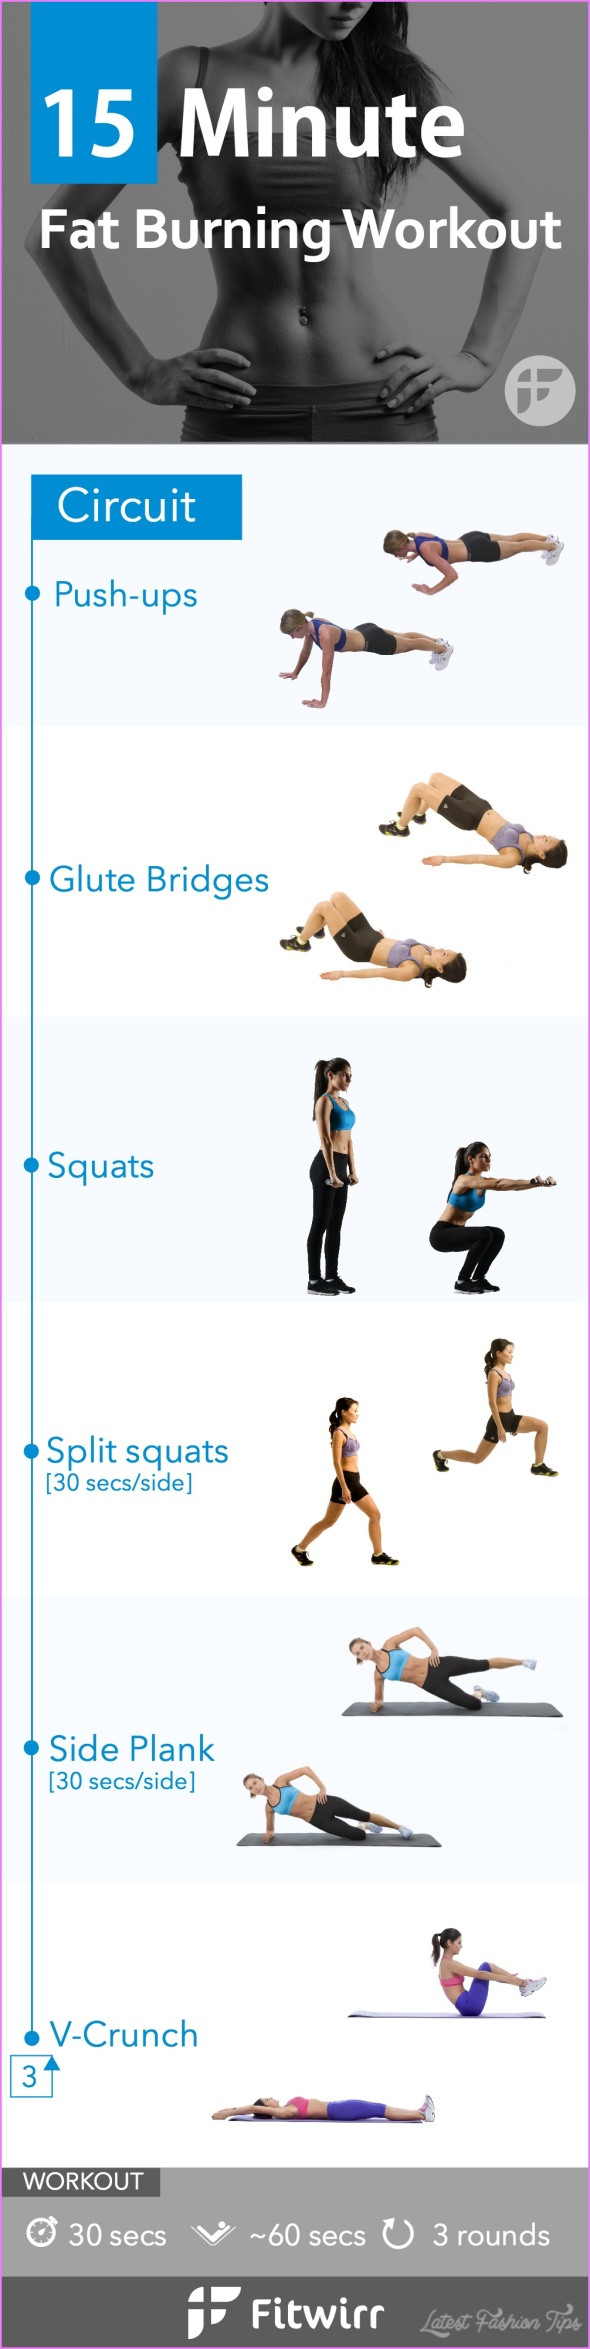 Weight Loss Exercises At Home Fat Burning Weightloss
 Best Weight Loss Exercises For Women LatestFashionTips